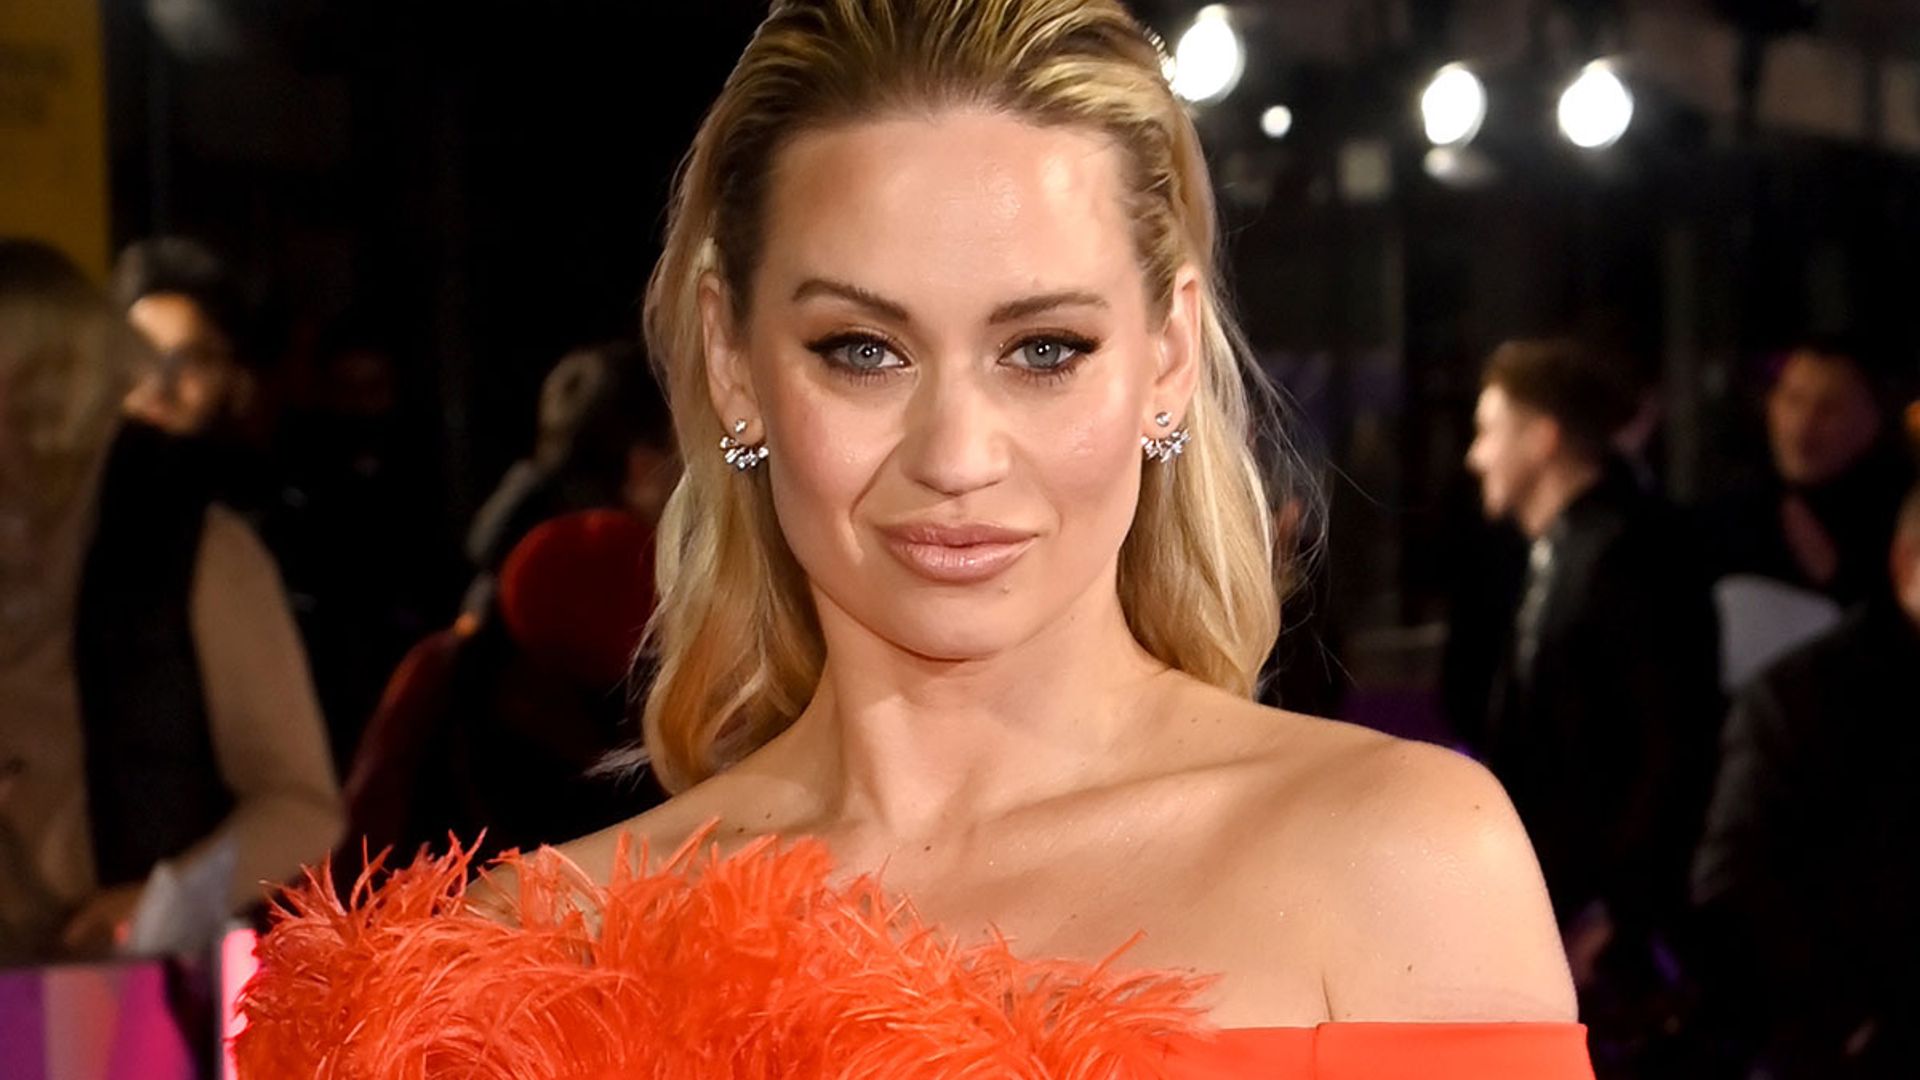 Dancing on Ice star Kimberly Wyatt’s health and fitness secrets might surprise you